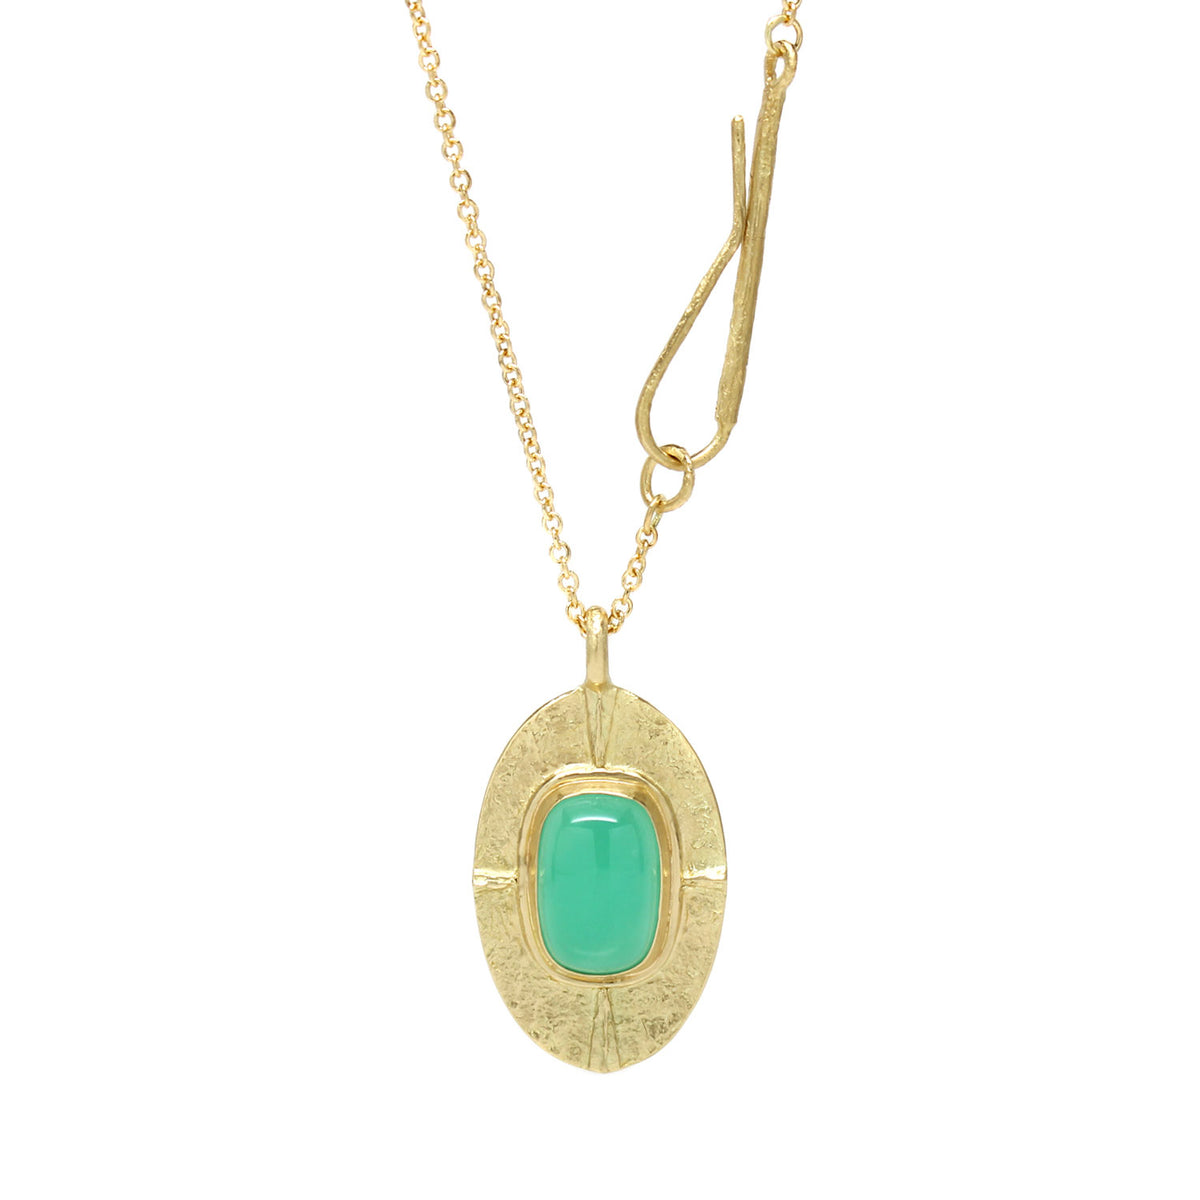 One-of-a-Kind Radial Ridge Oval Chrysoprase Necklace